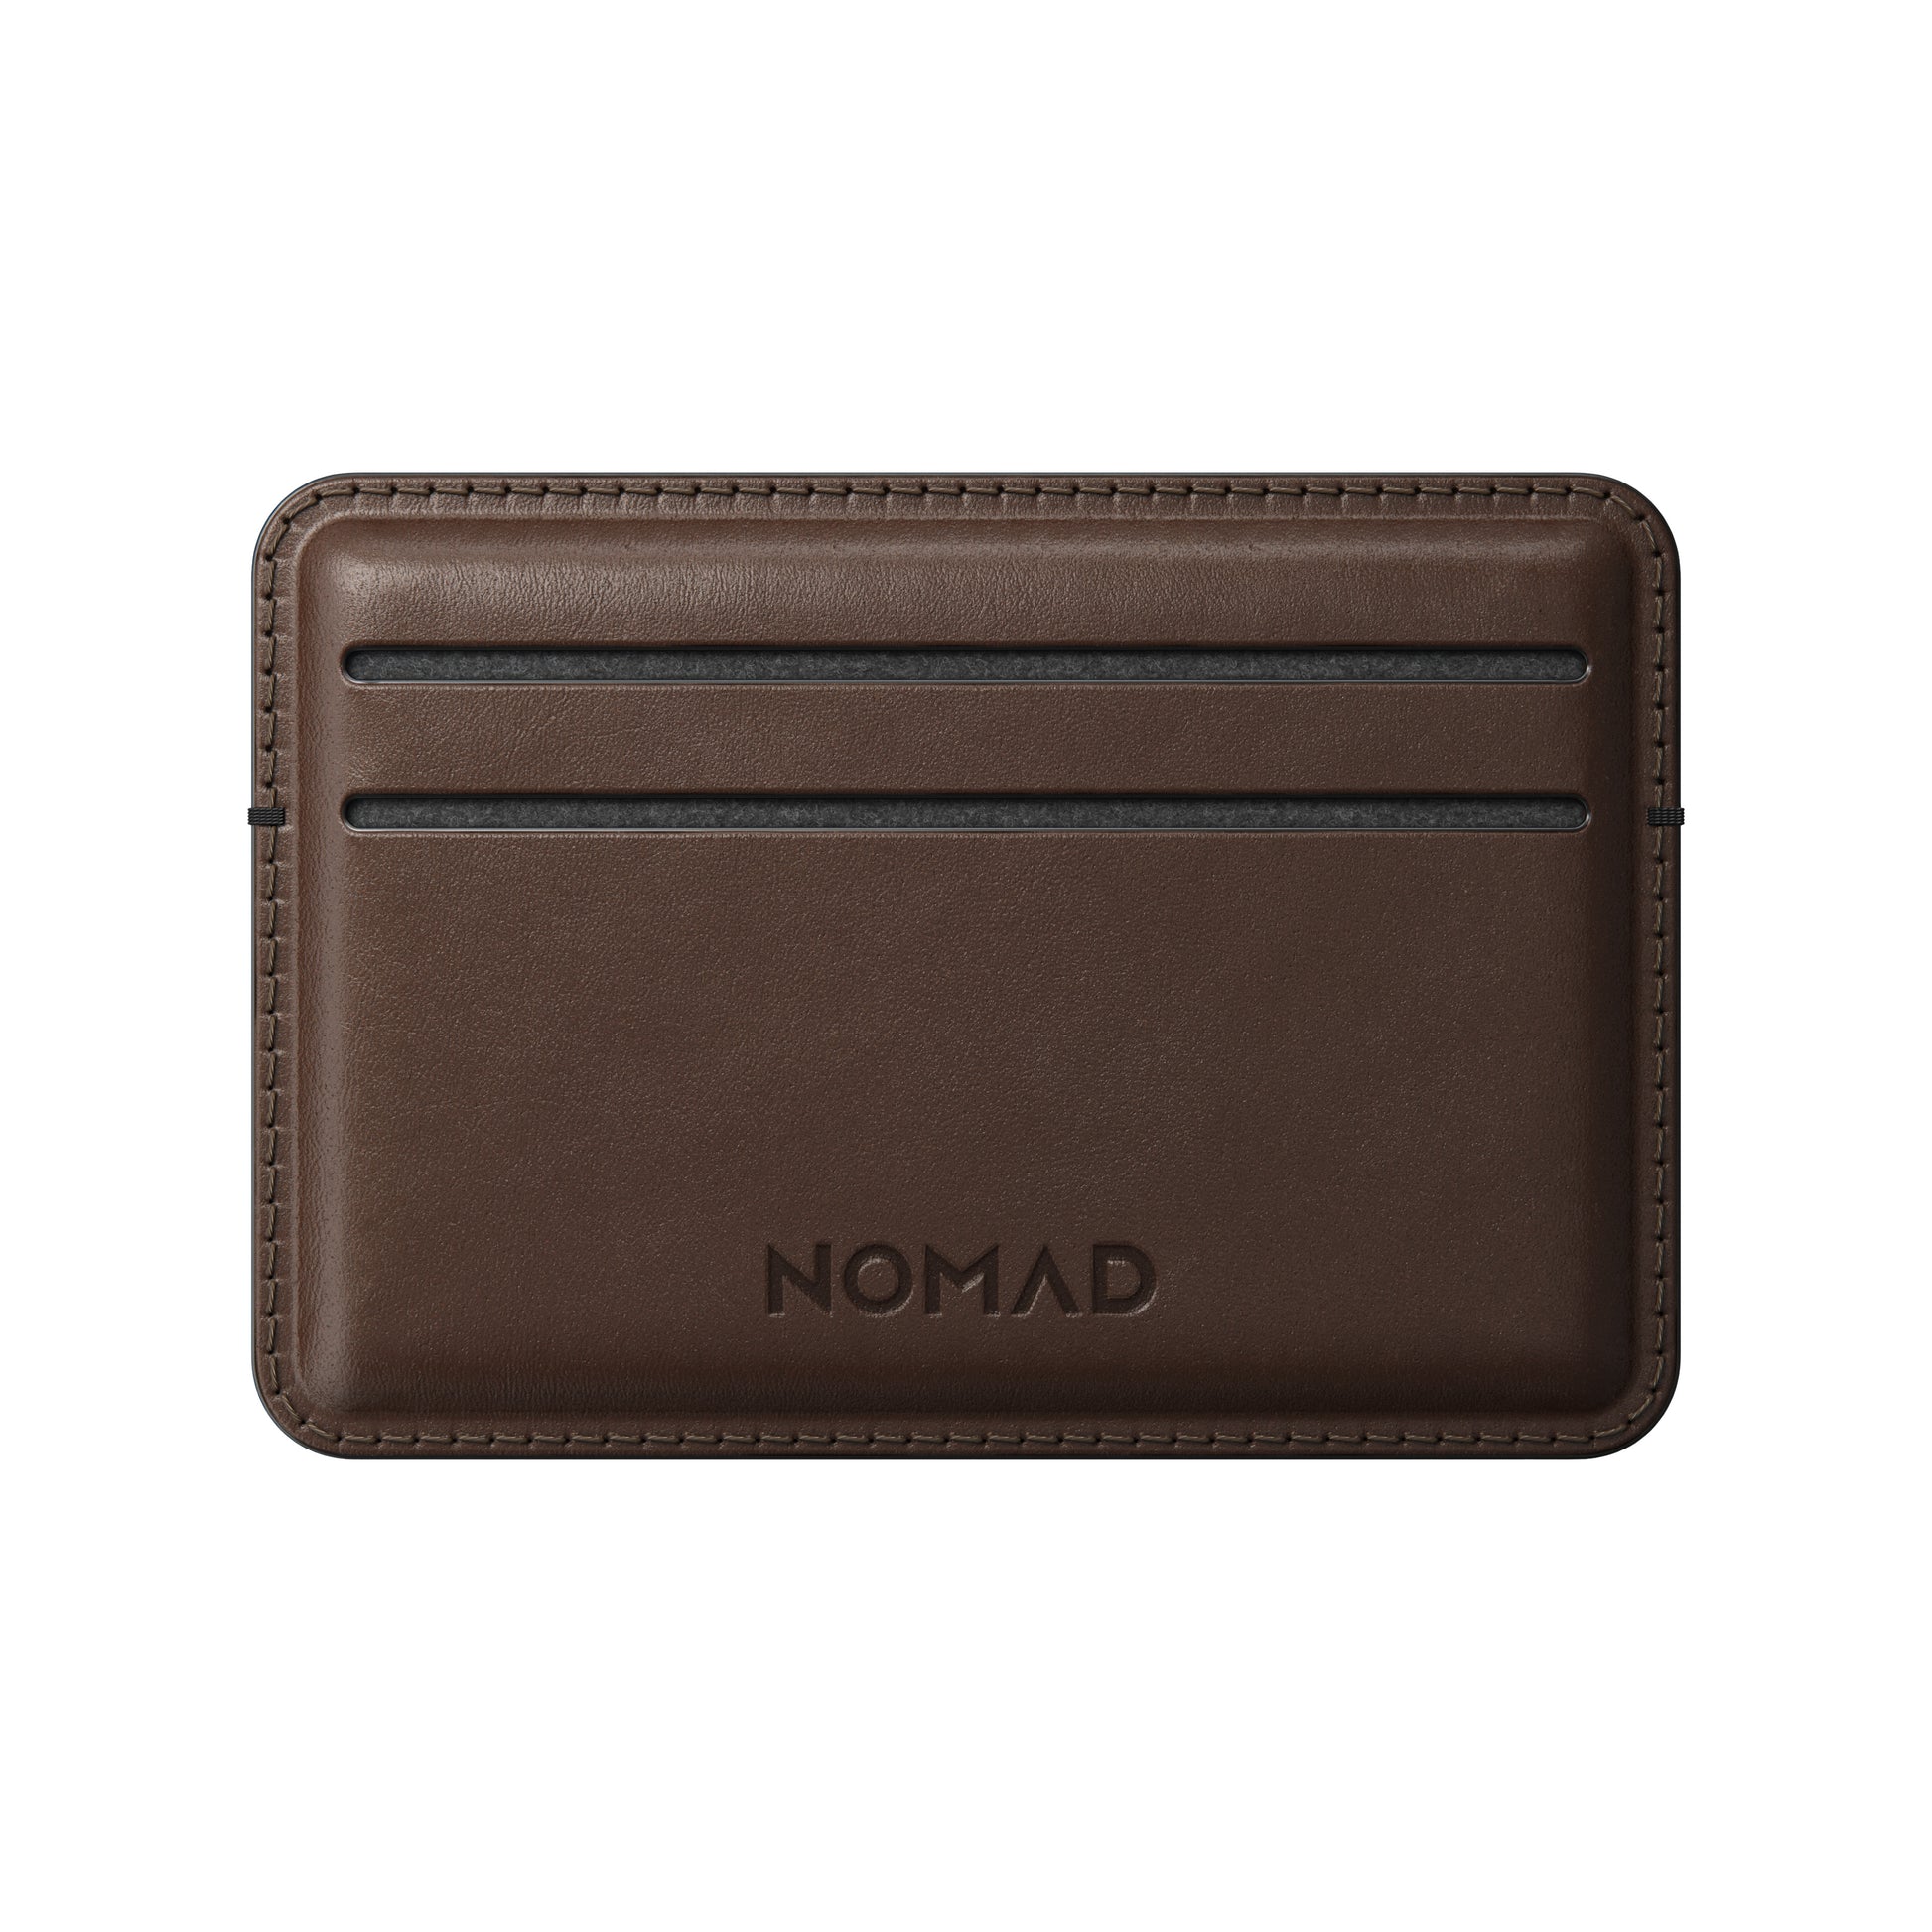 Nomad Card Wallet - The Usual